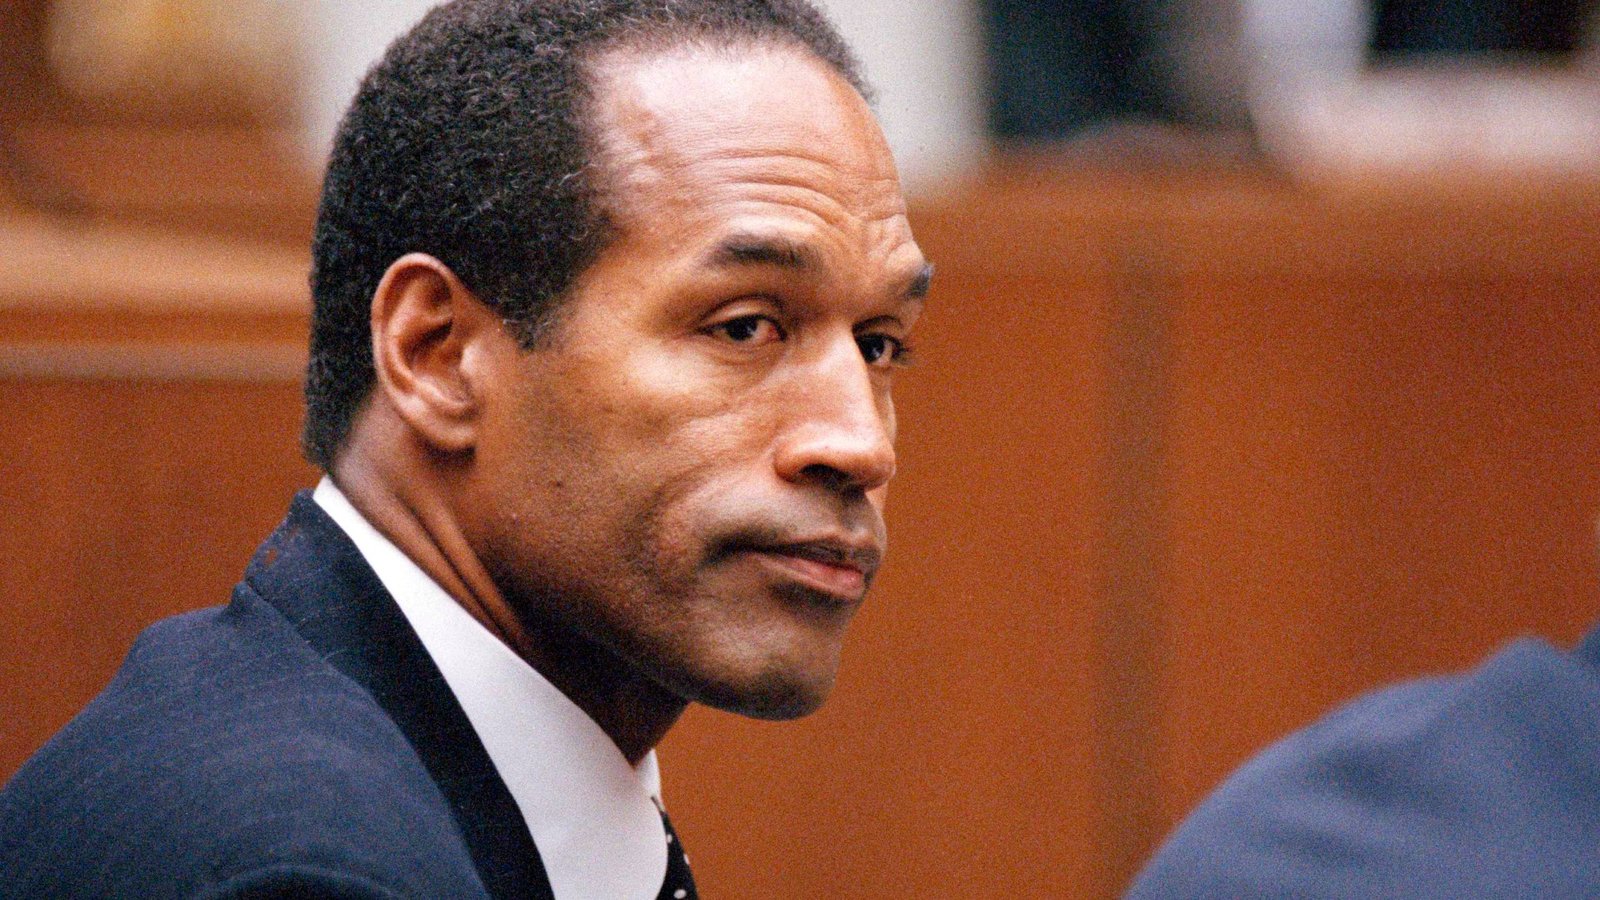 Shamed OJ Simpson quietly cremated in Las Vegas after ex NFL star died content from cancer aged 76 lawyer reveals